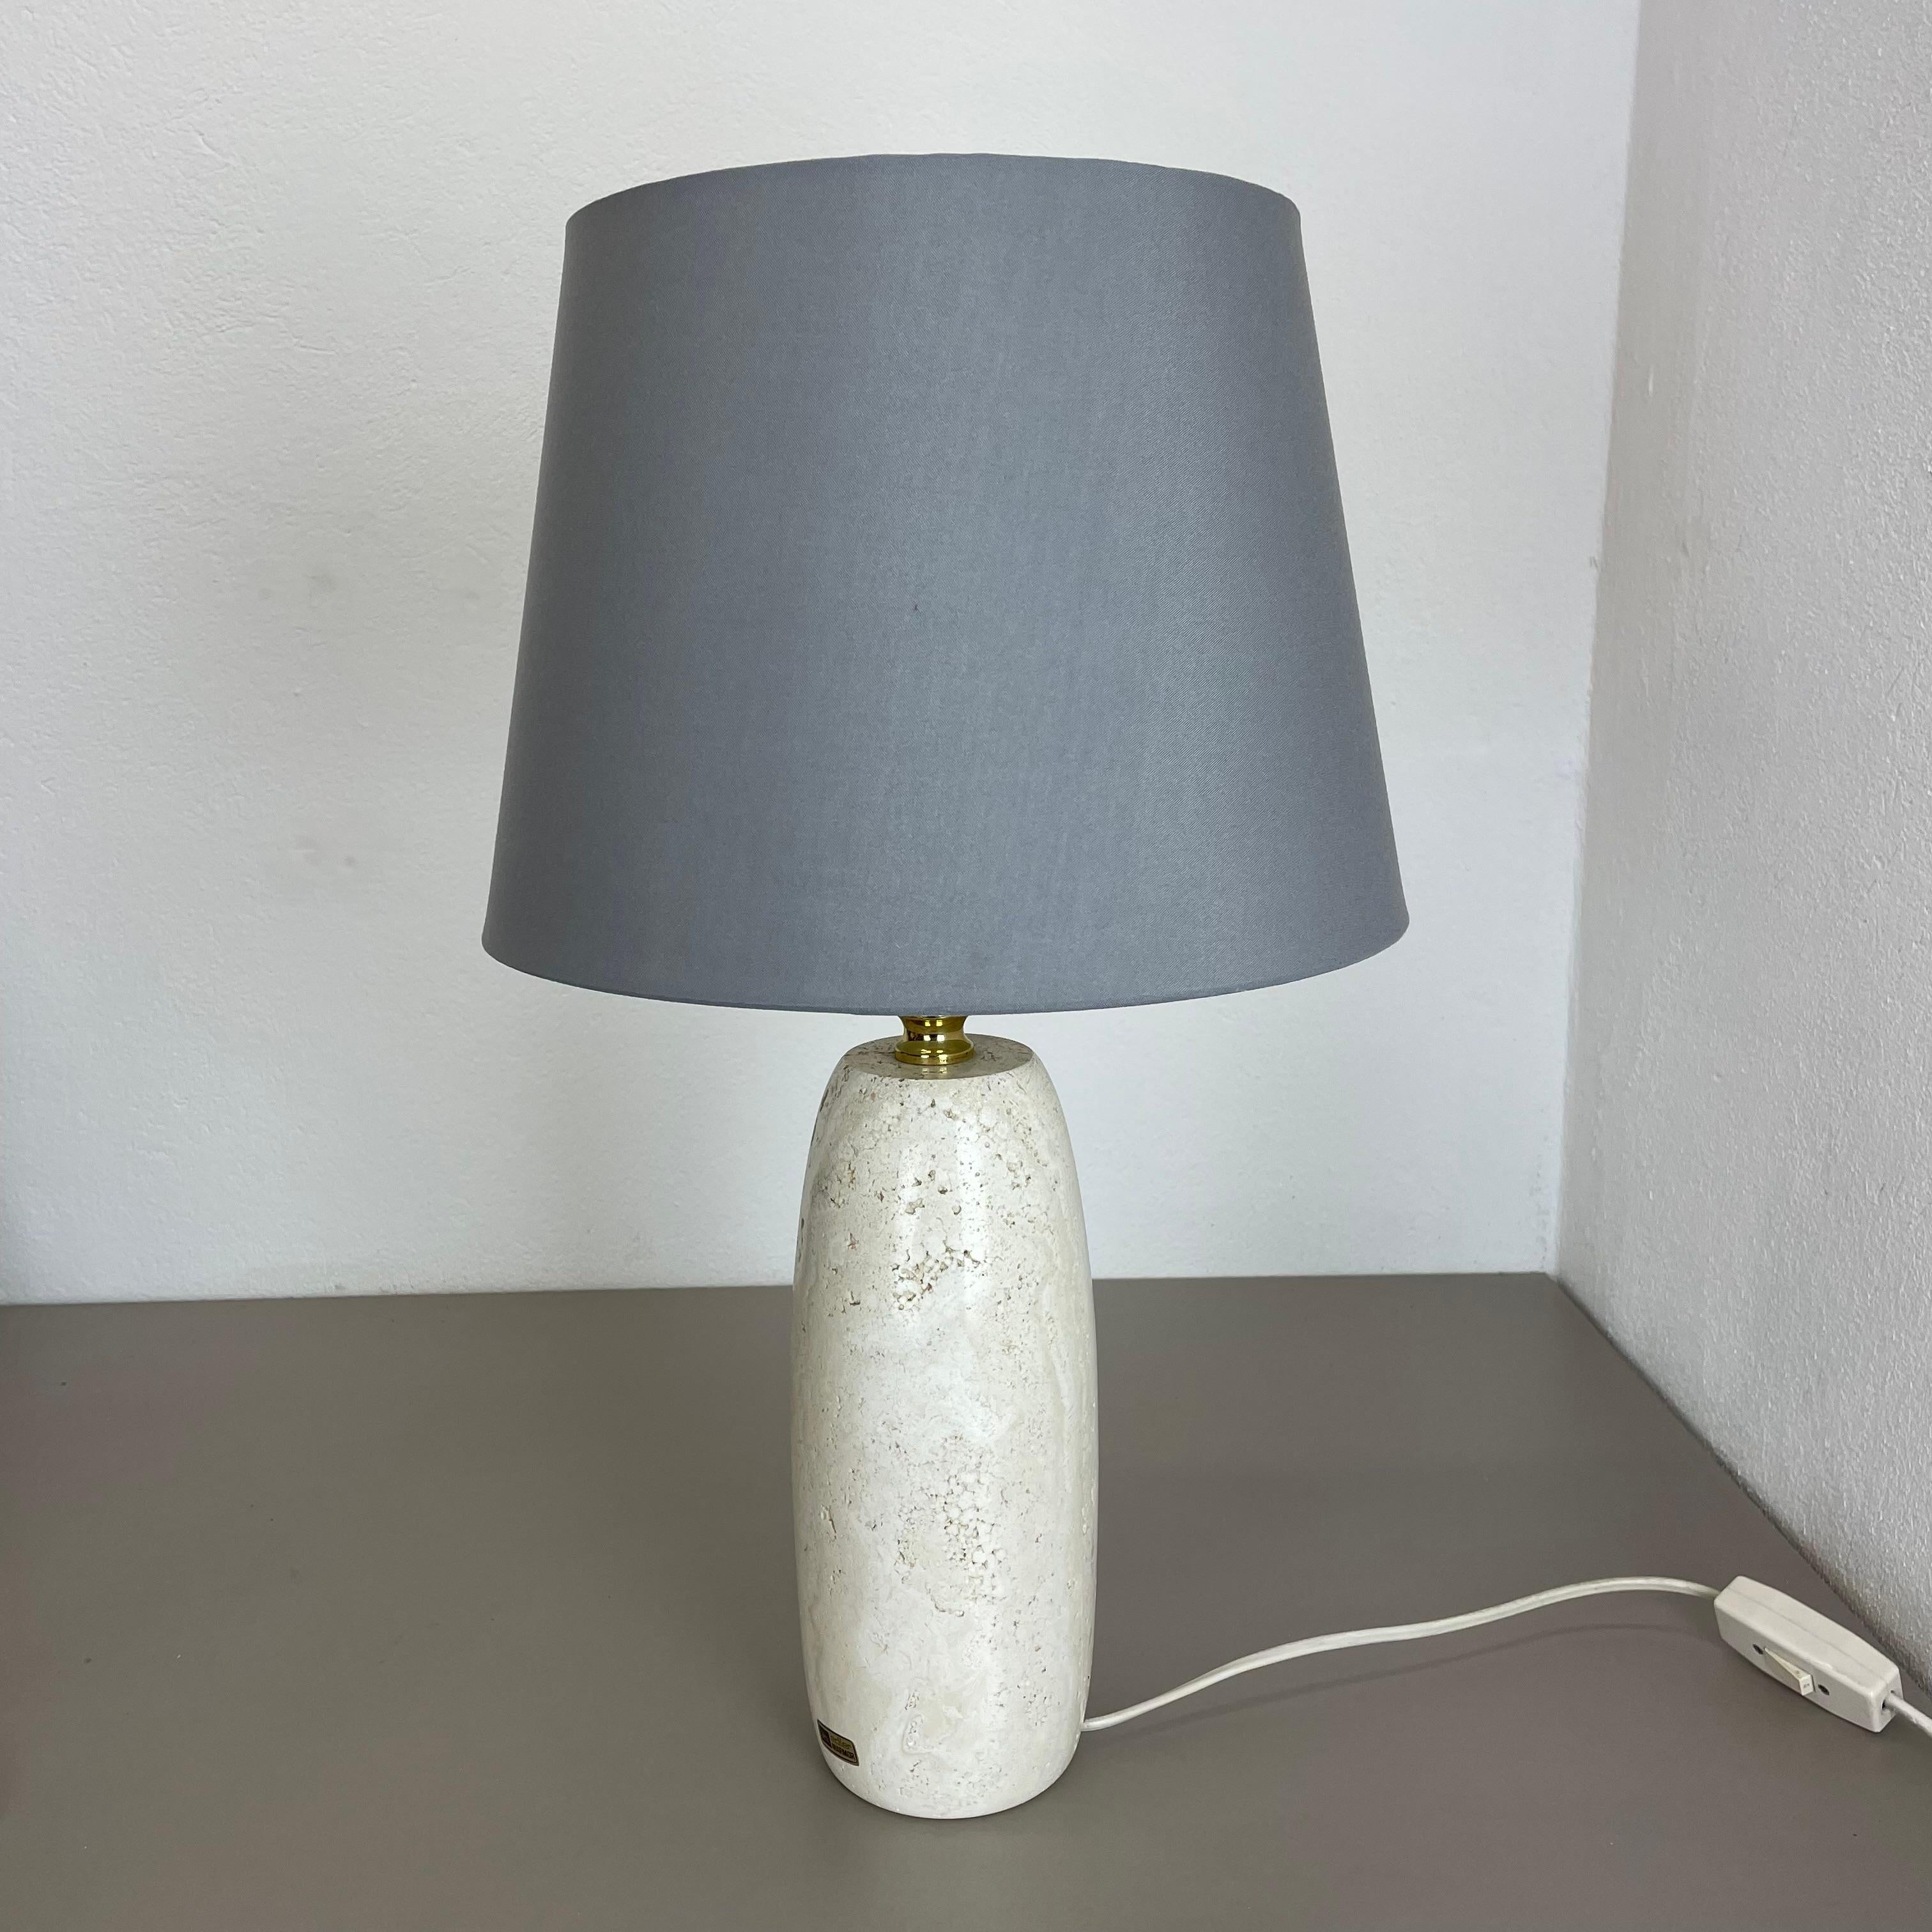 Hollywood Regency 6.4kg Travertine Marble Fratelli Mannelli Style Table Light Base, Italy, 1970s For Sale